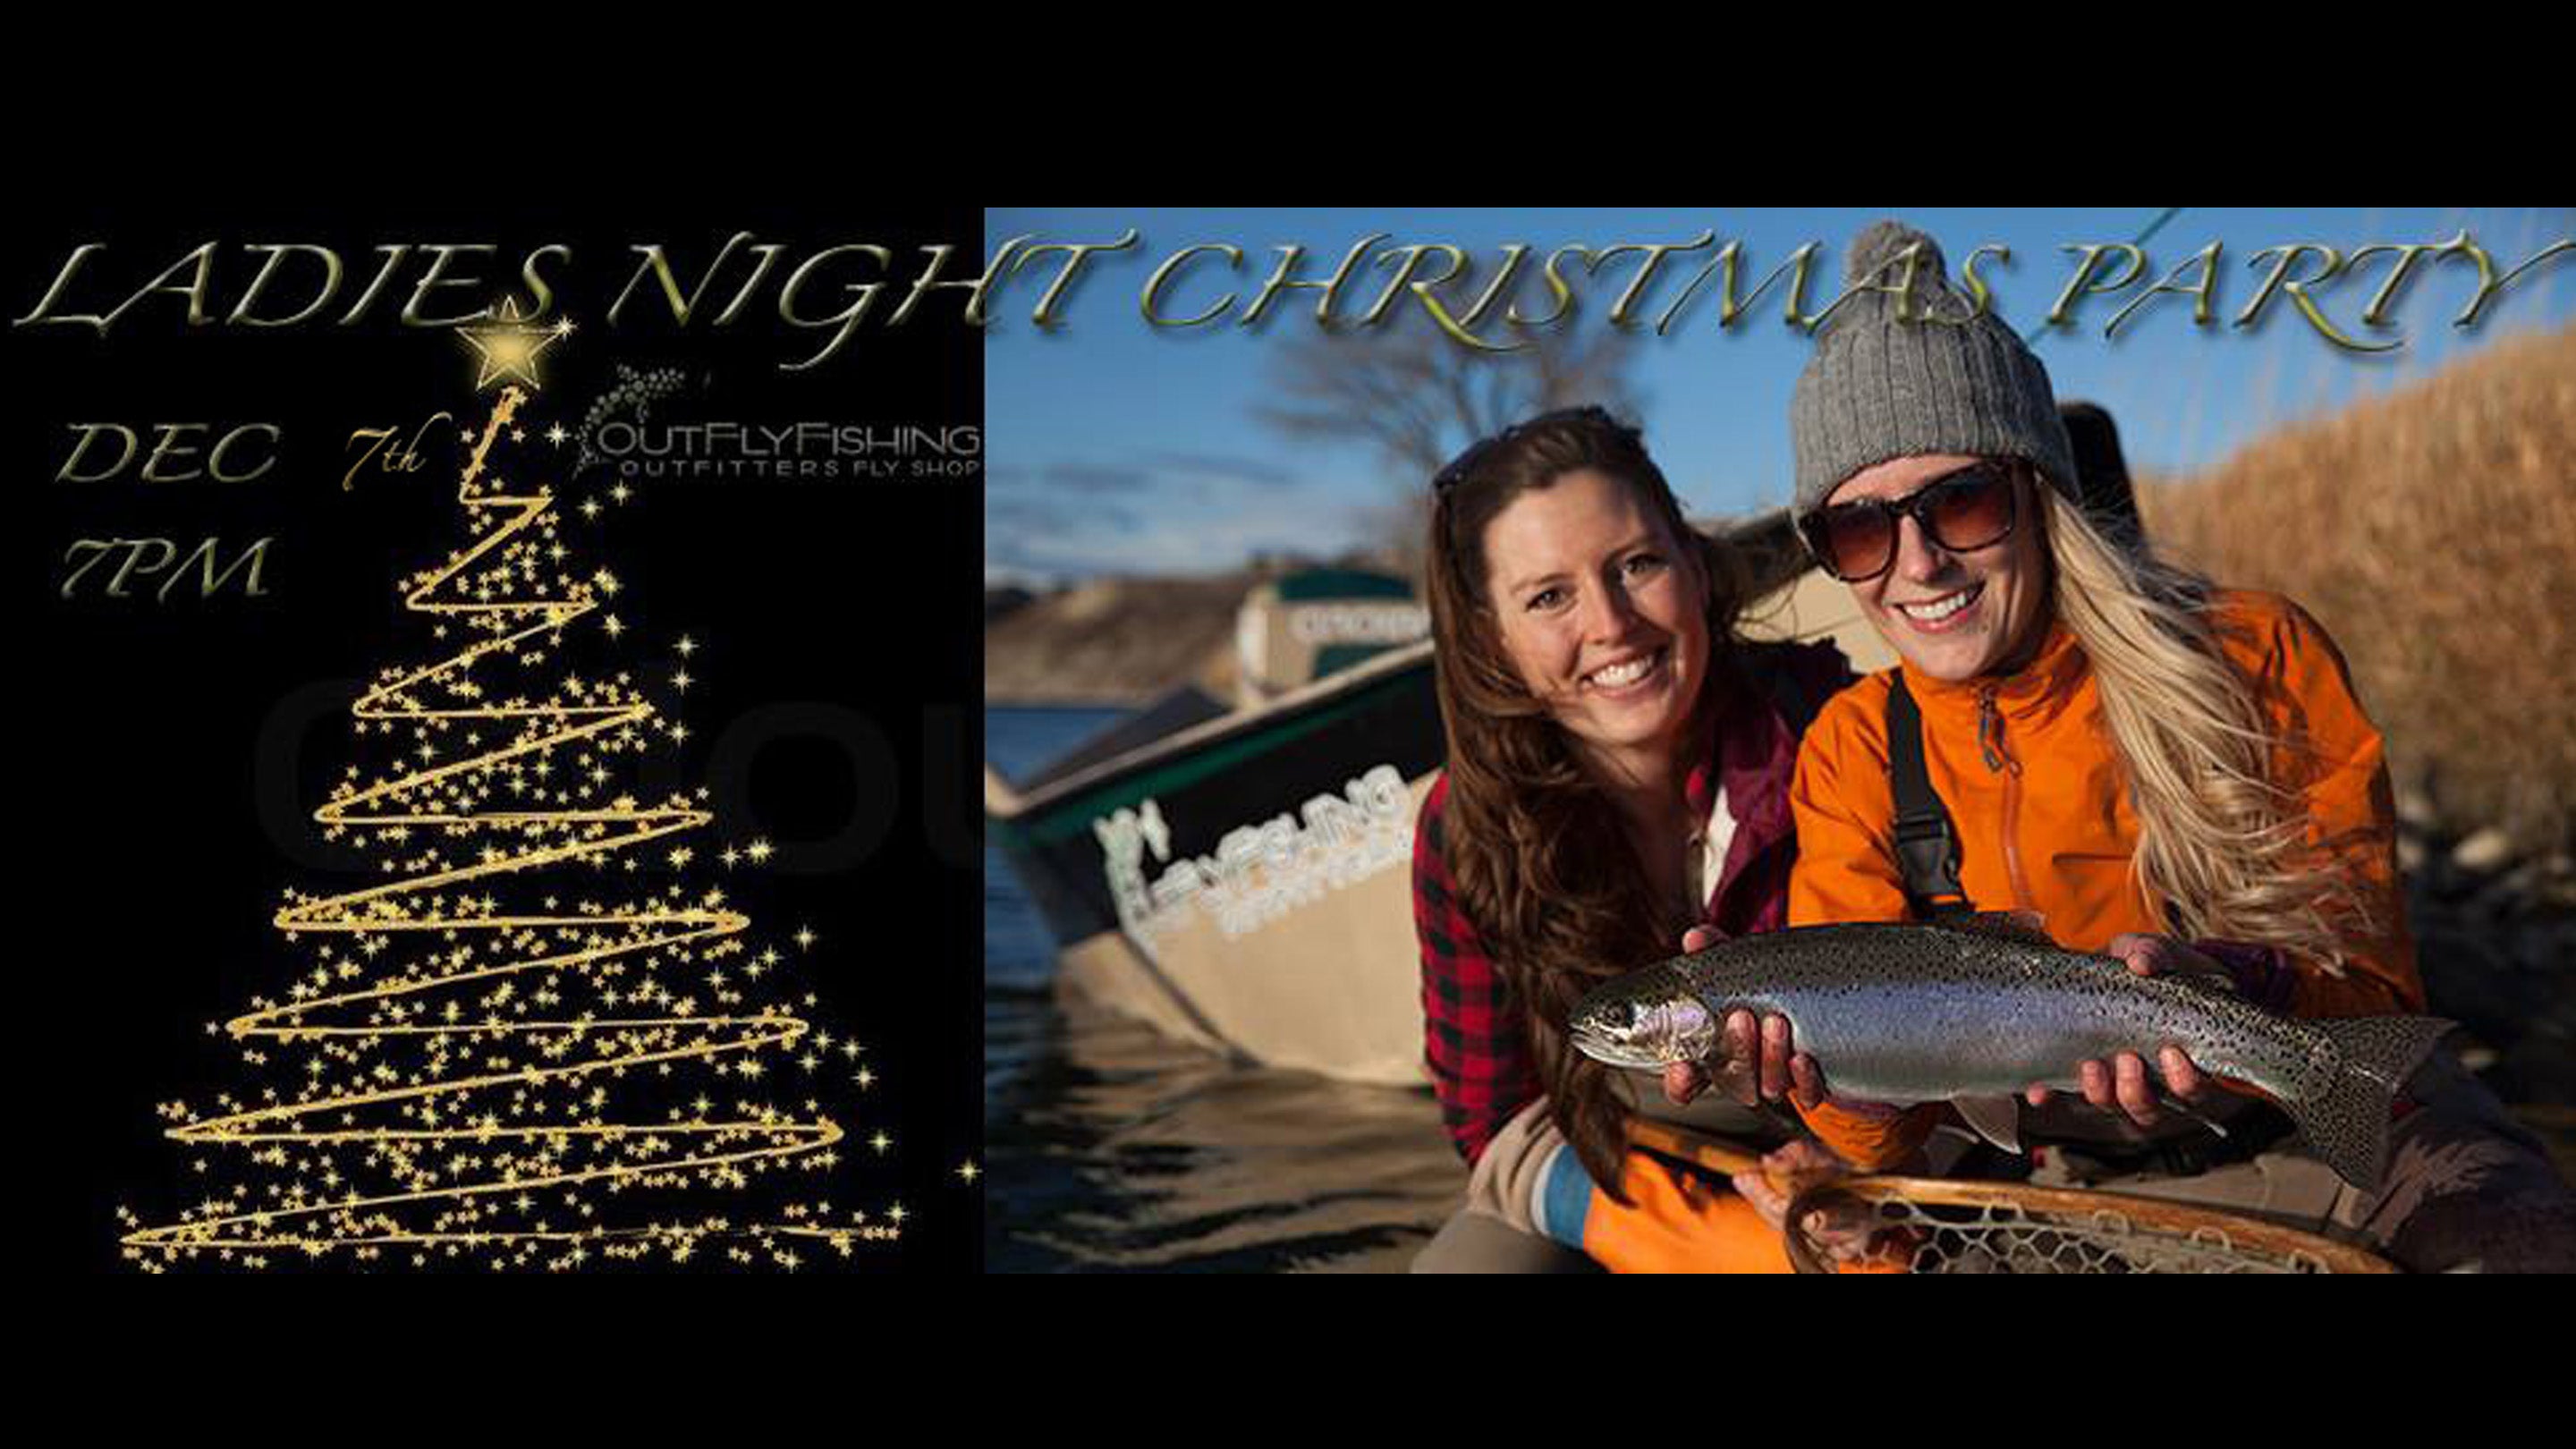 Annual Ladies Night Christmas Party Hosted by Out Fly Fishing